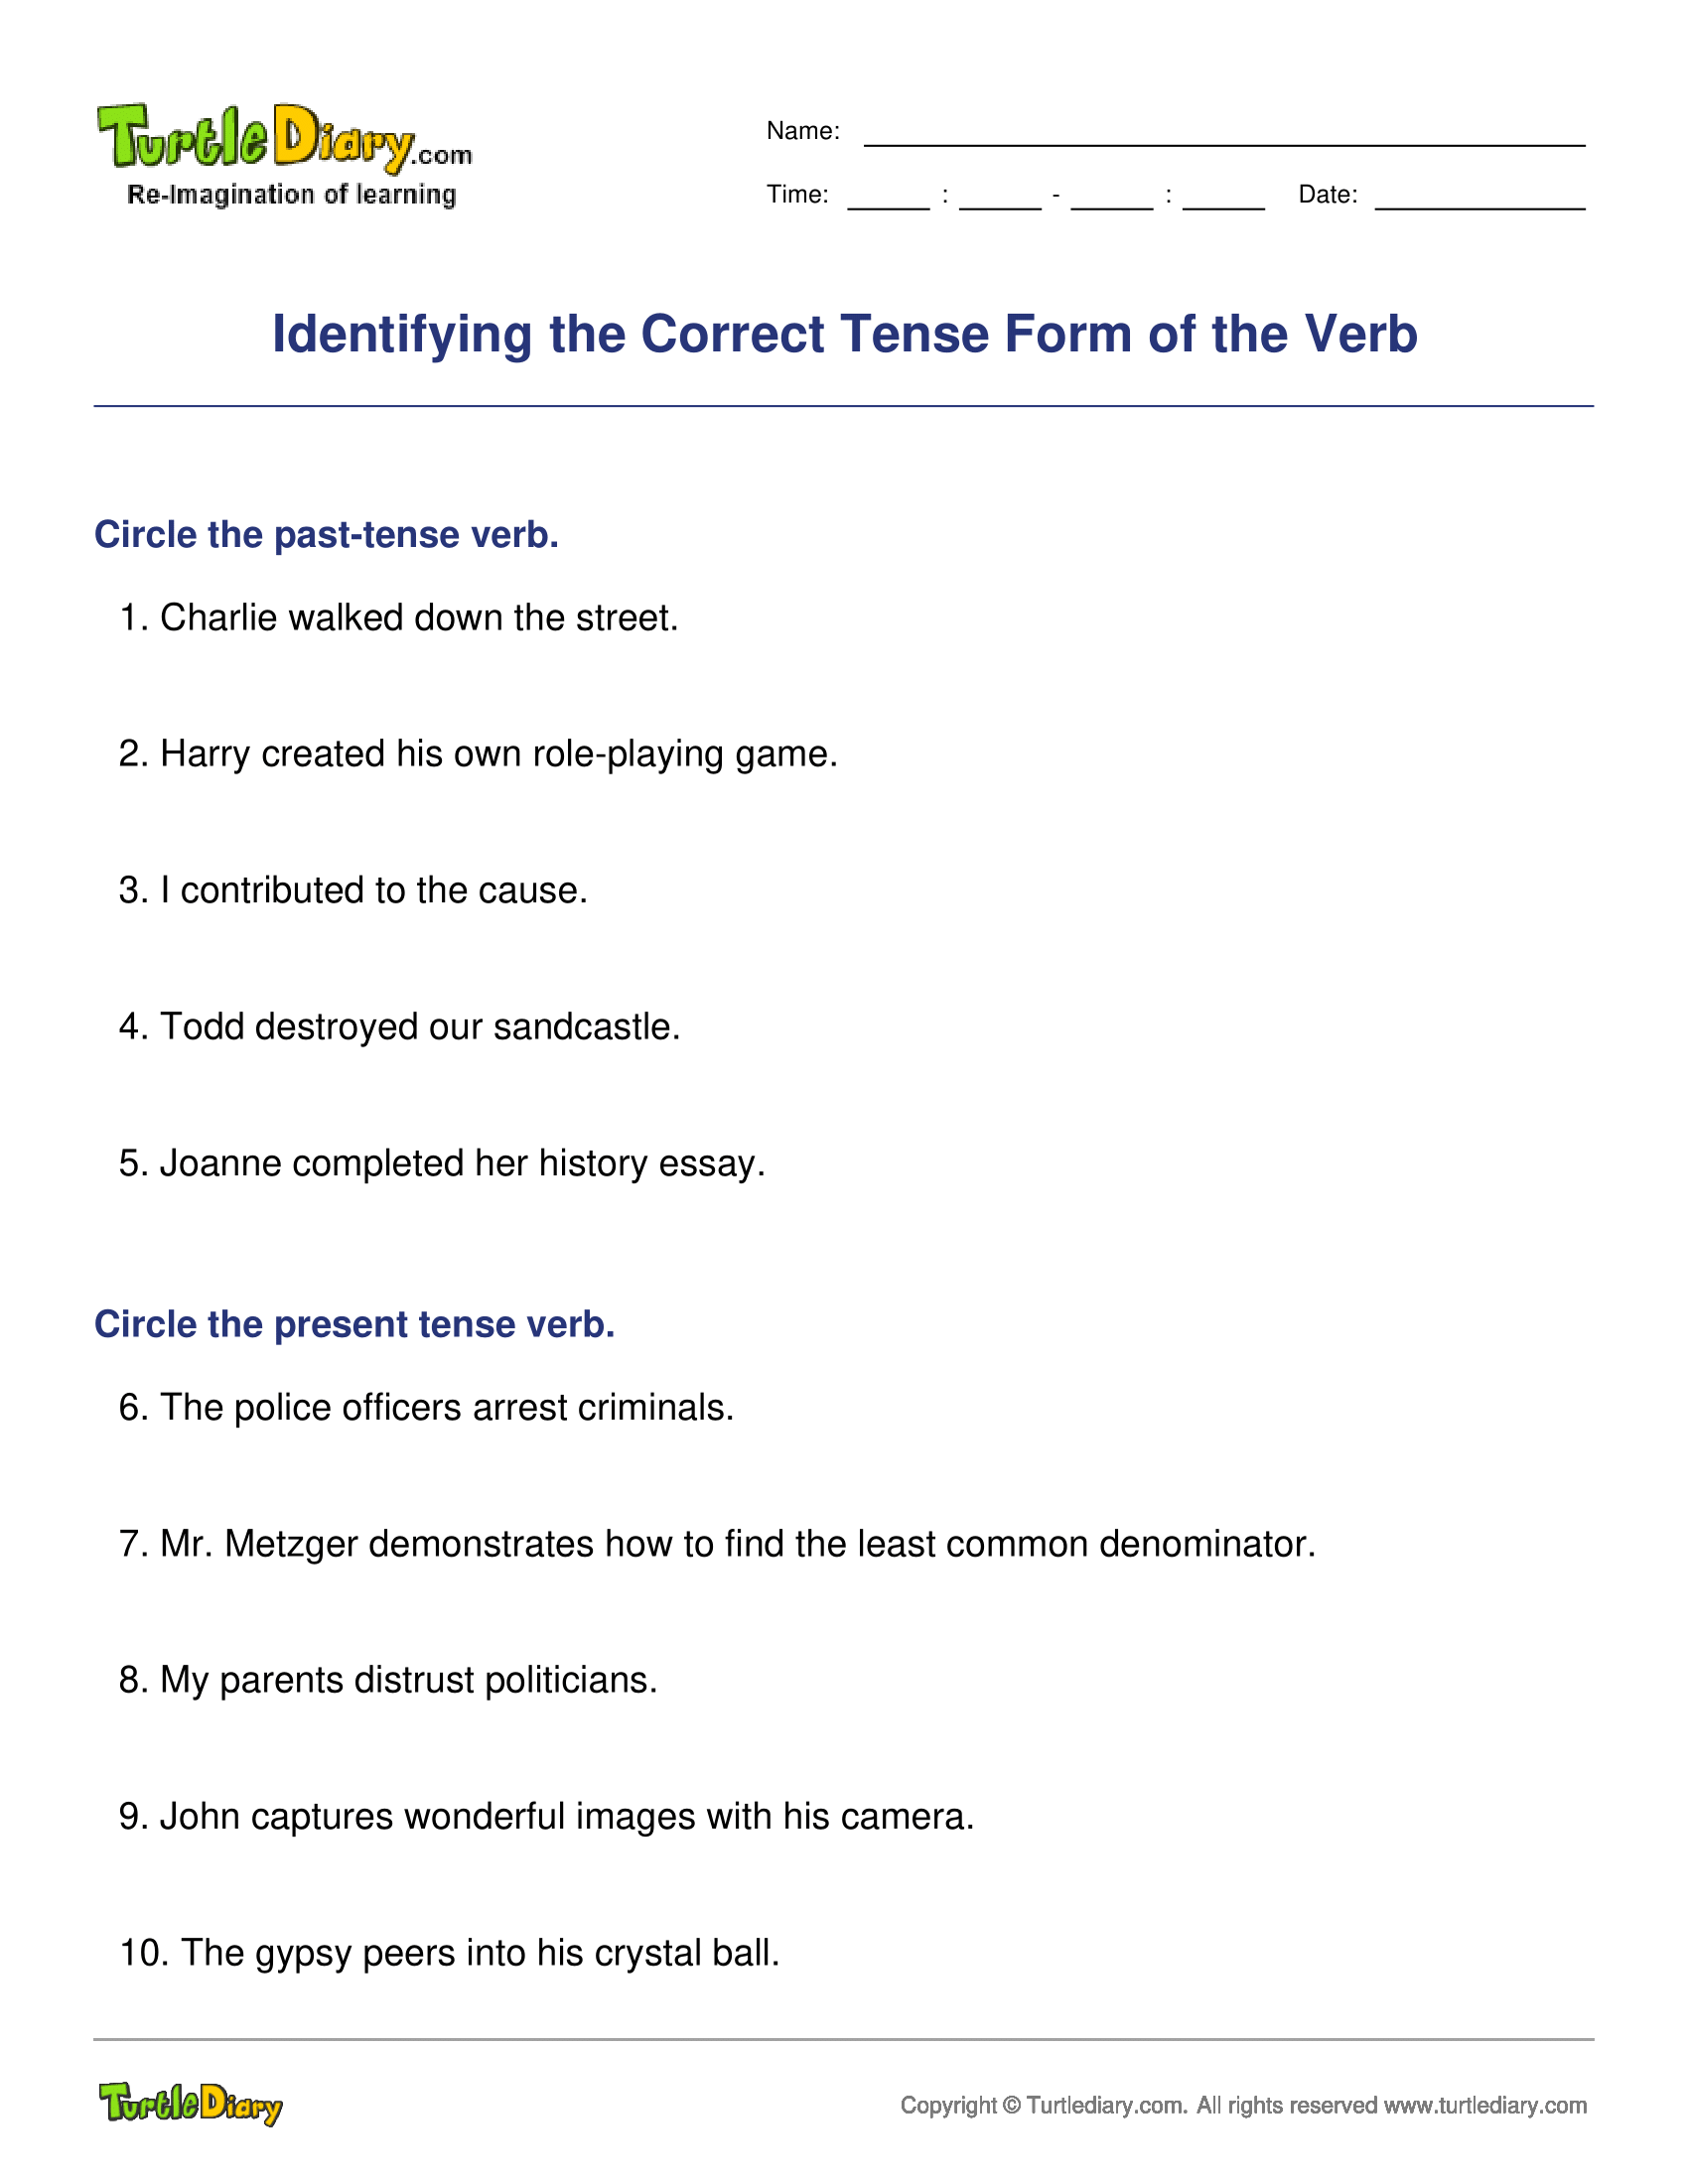 Identifying the Correct Tense Form of the Verb